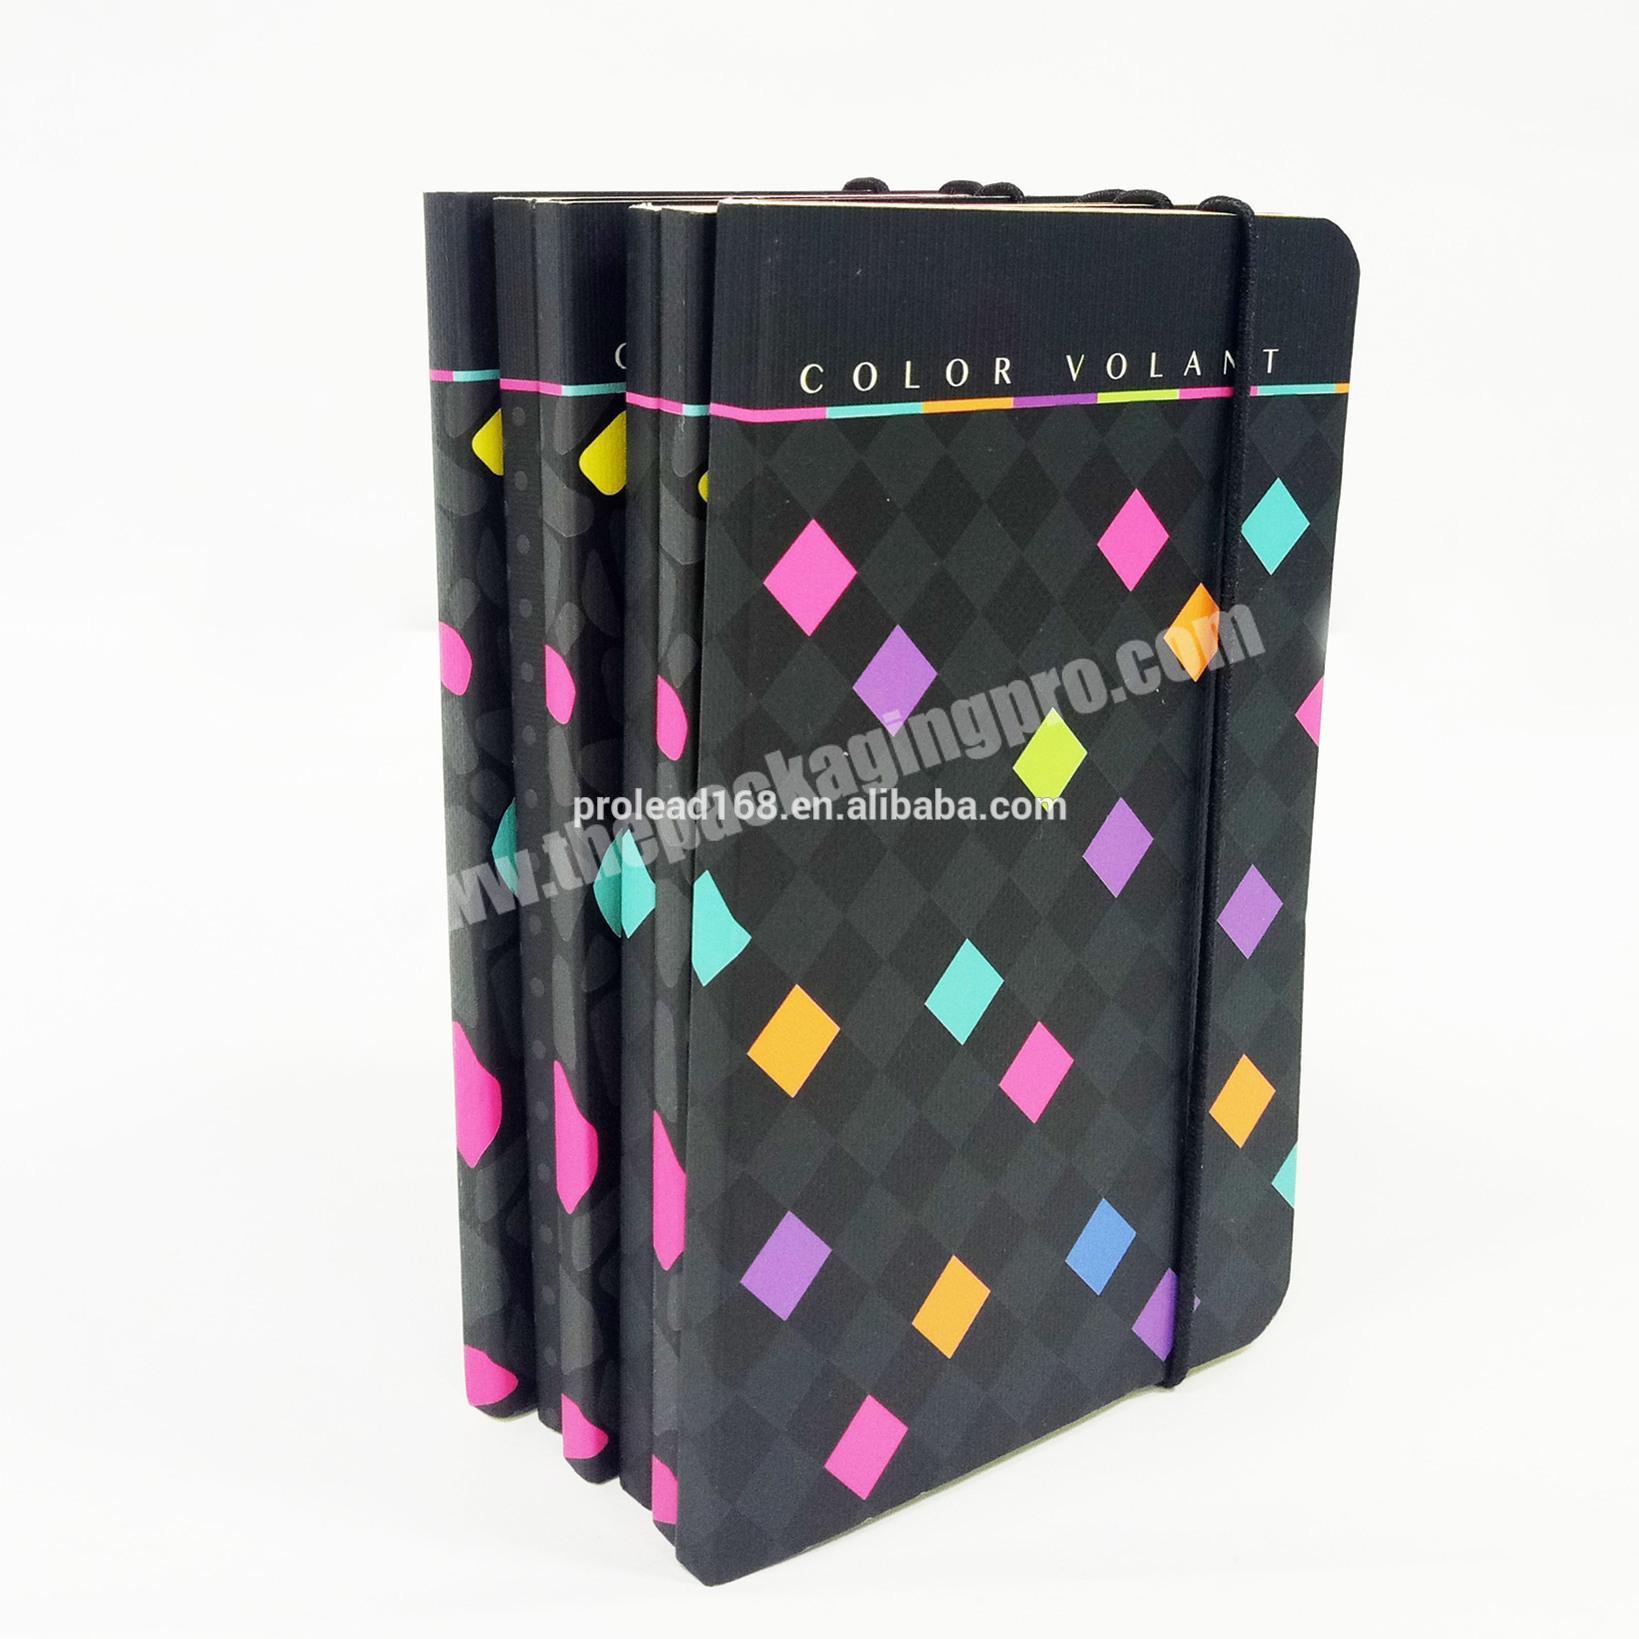 Promotional mini diary exercise notebook for school lifestyle planner